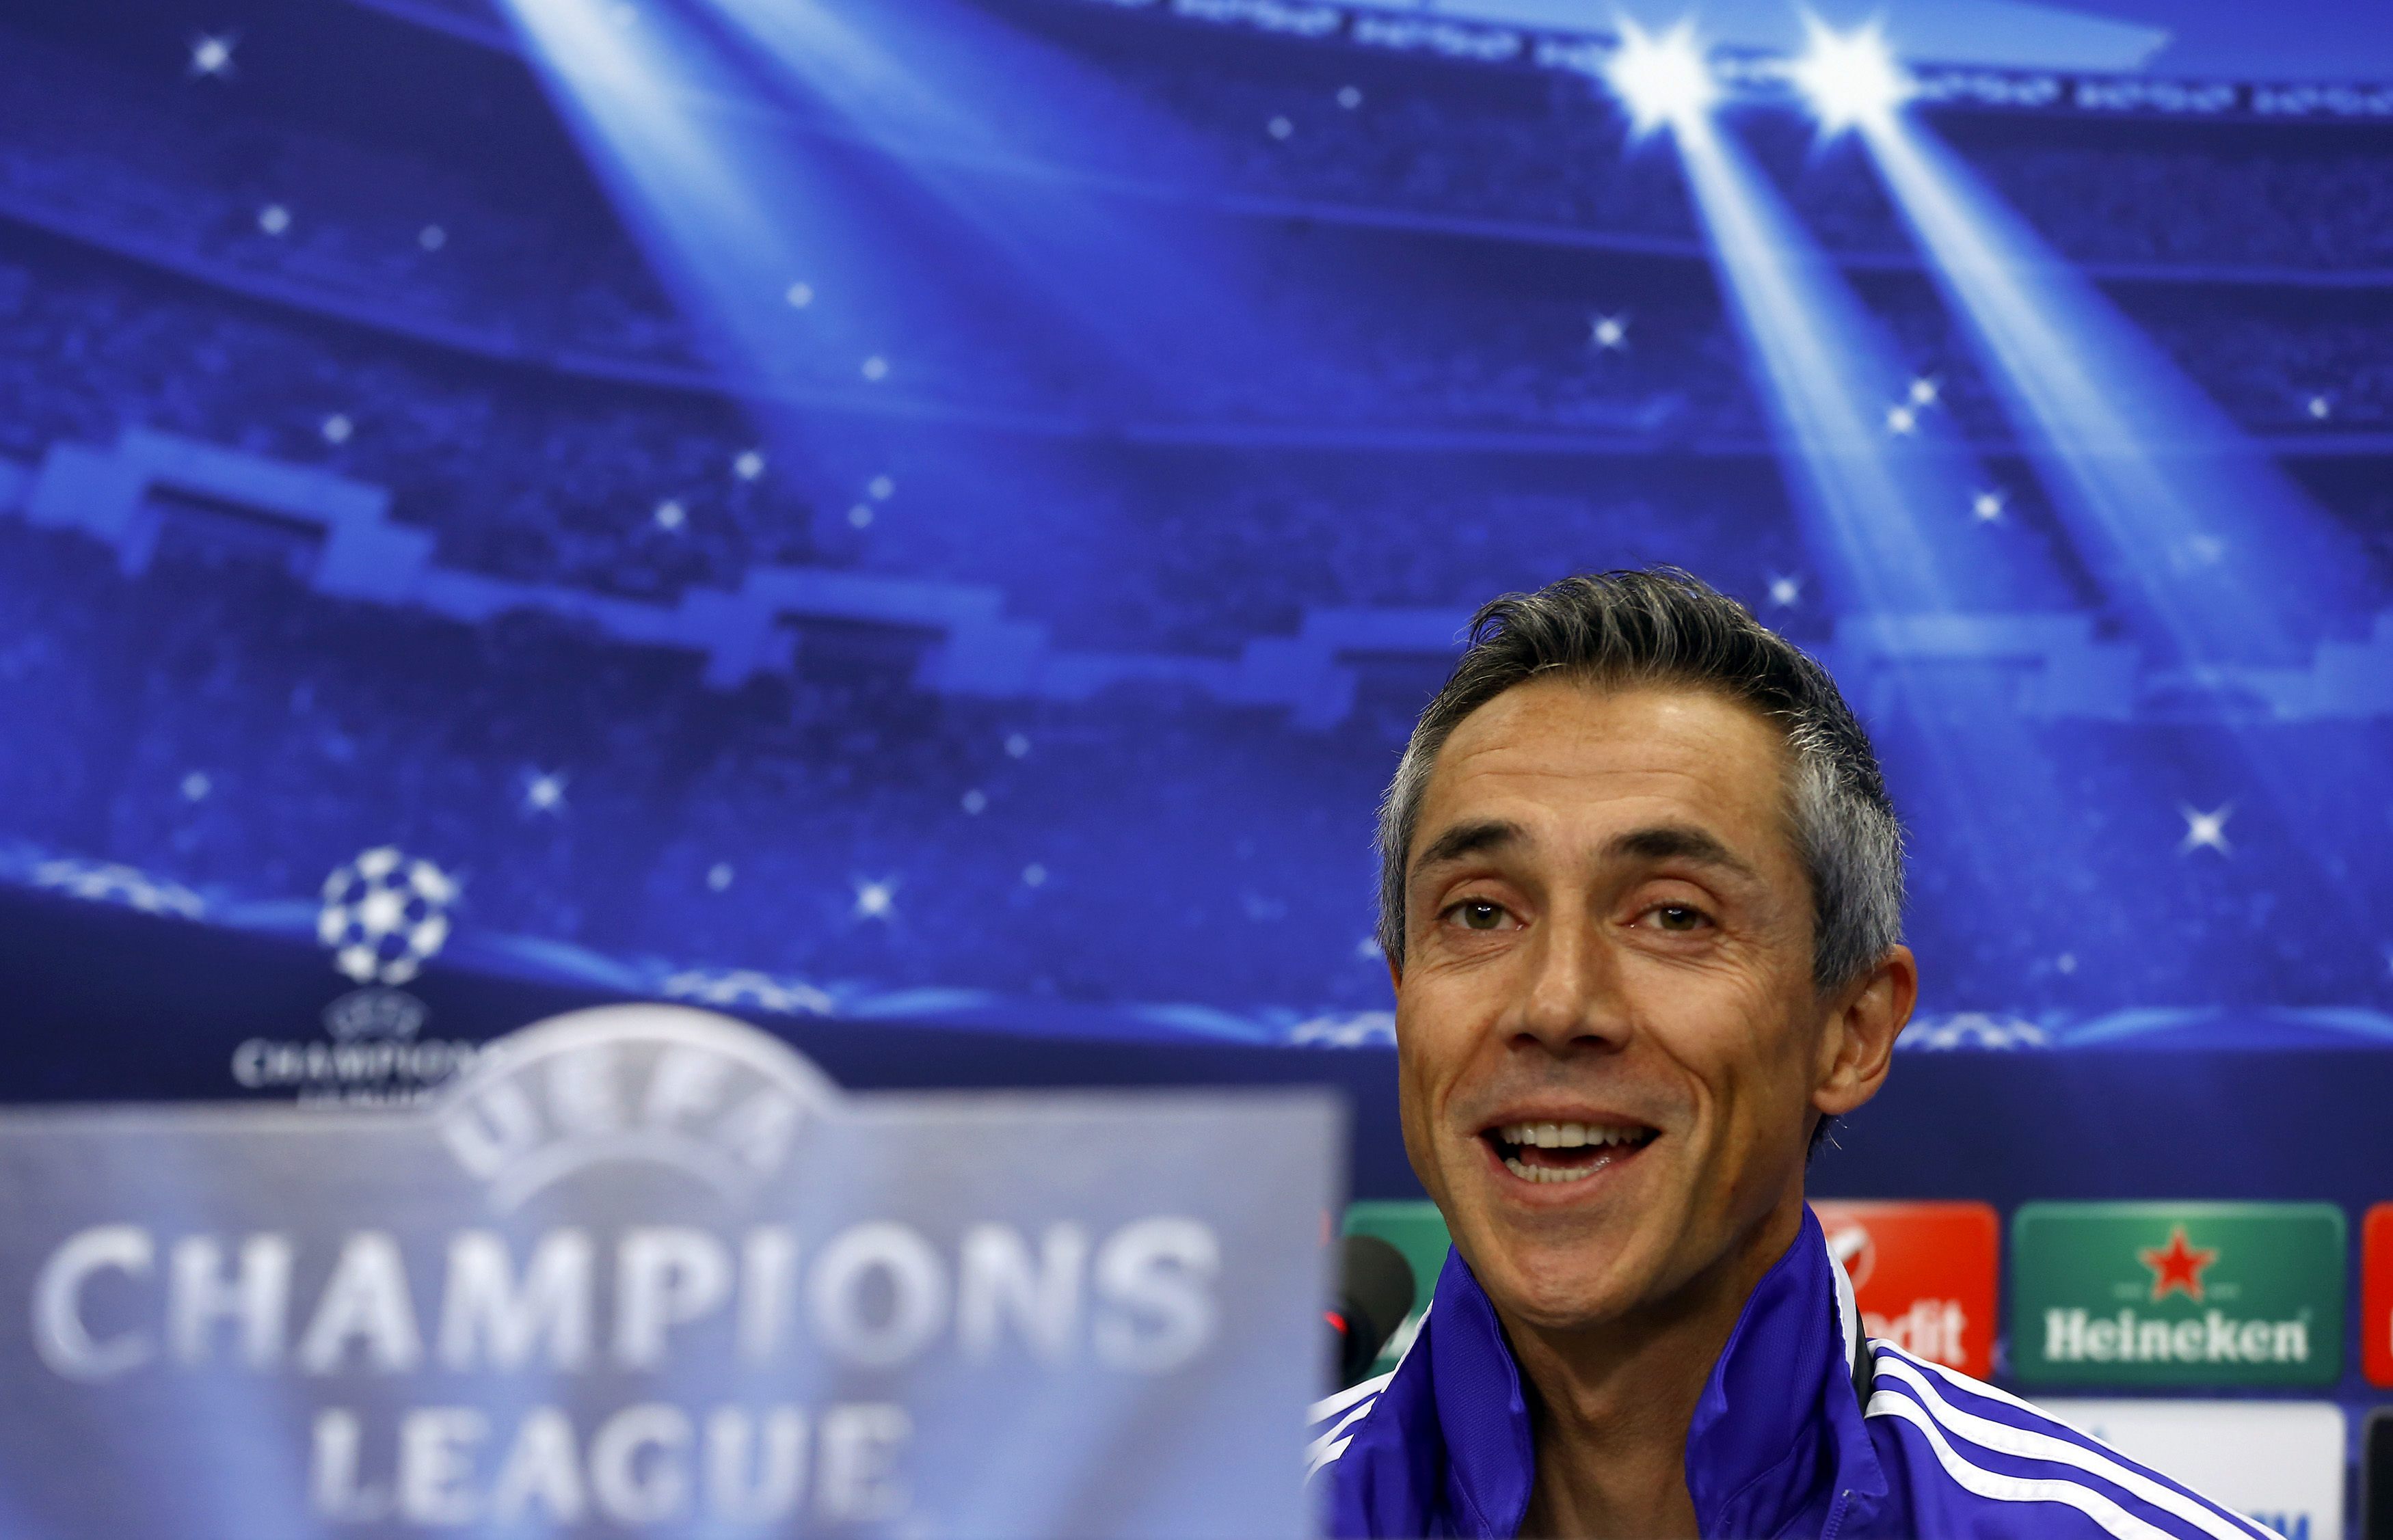 FC Basel's coach Paulo Sousa smiles as he addresses a news conference ahead of their Champions League Group B match against Liverpool in Basel September 30, 2014. REUTERS/Arnd Wiegmann (SWITZERLAND - Tags: SPORT SOCCER)